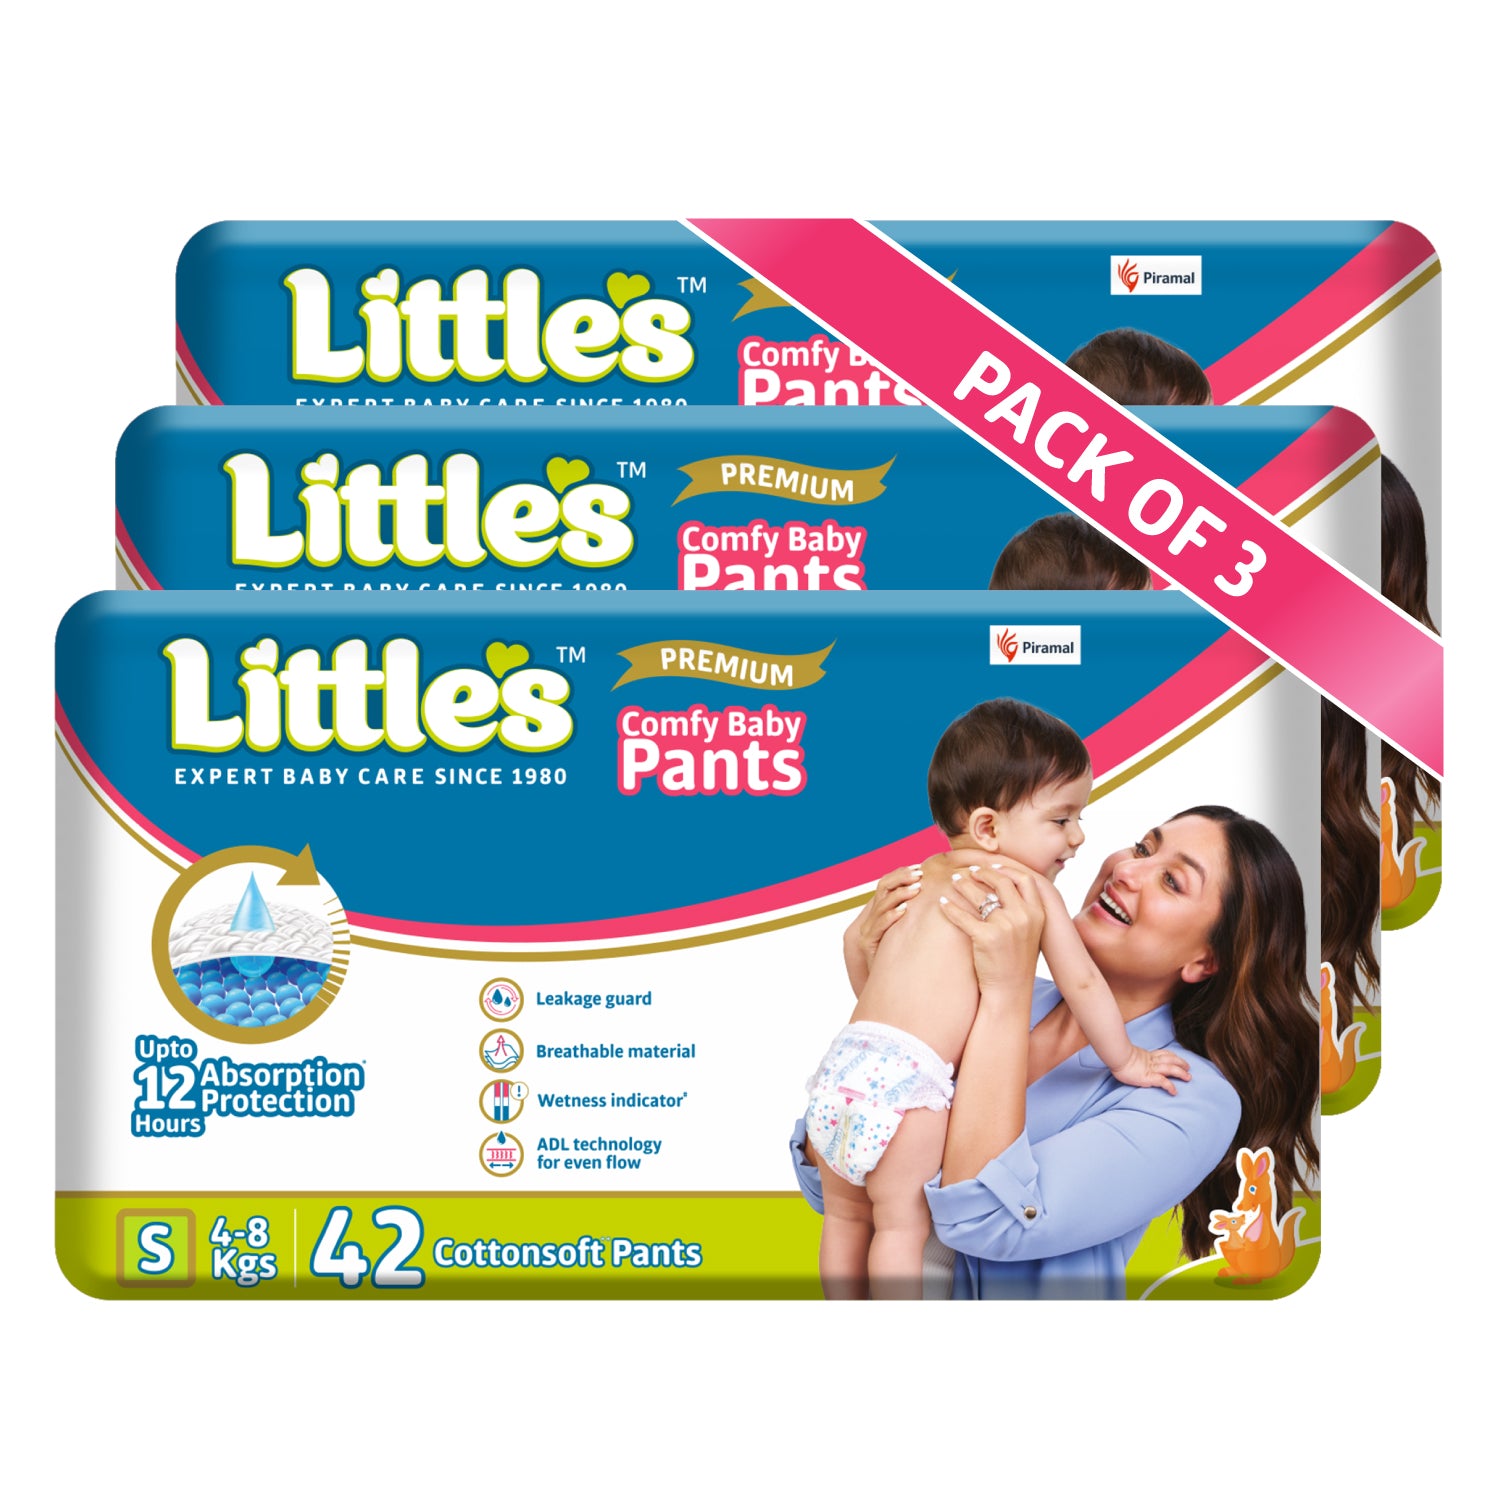 Little's Baby Pants Diapers with Wetness Indicator & 12 Hours Absorption, cottonsoft pants diaper SMALL pack of 3